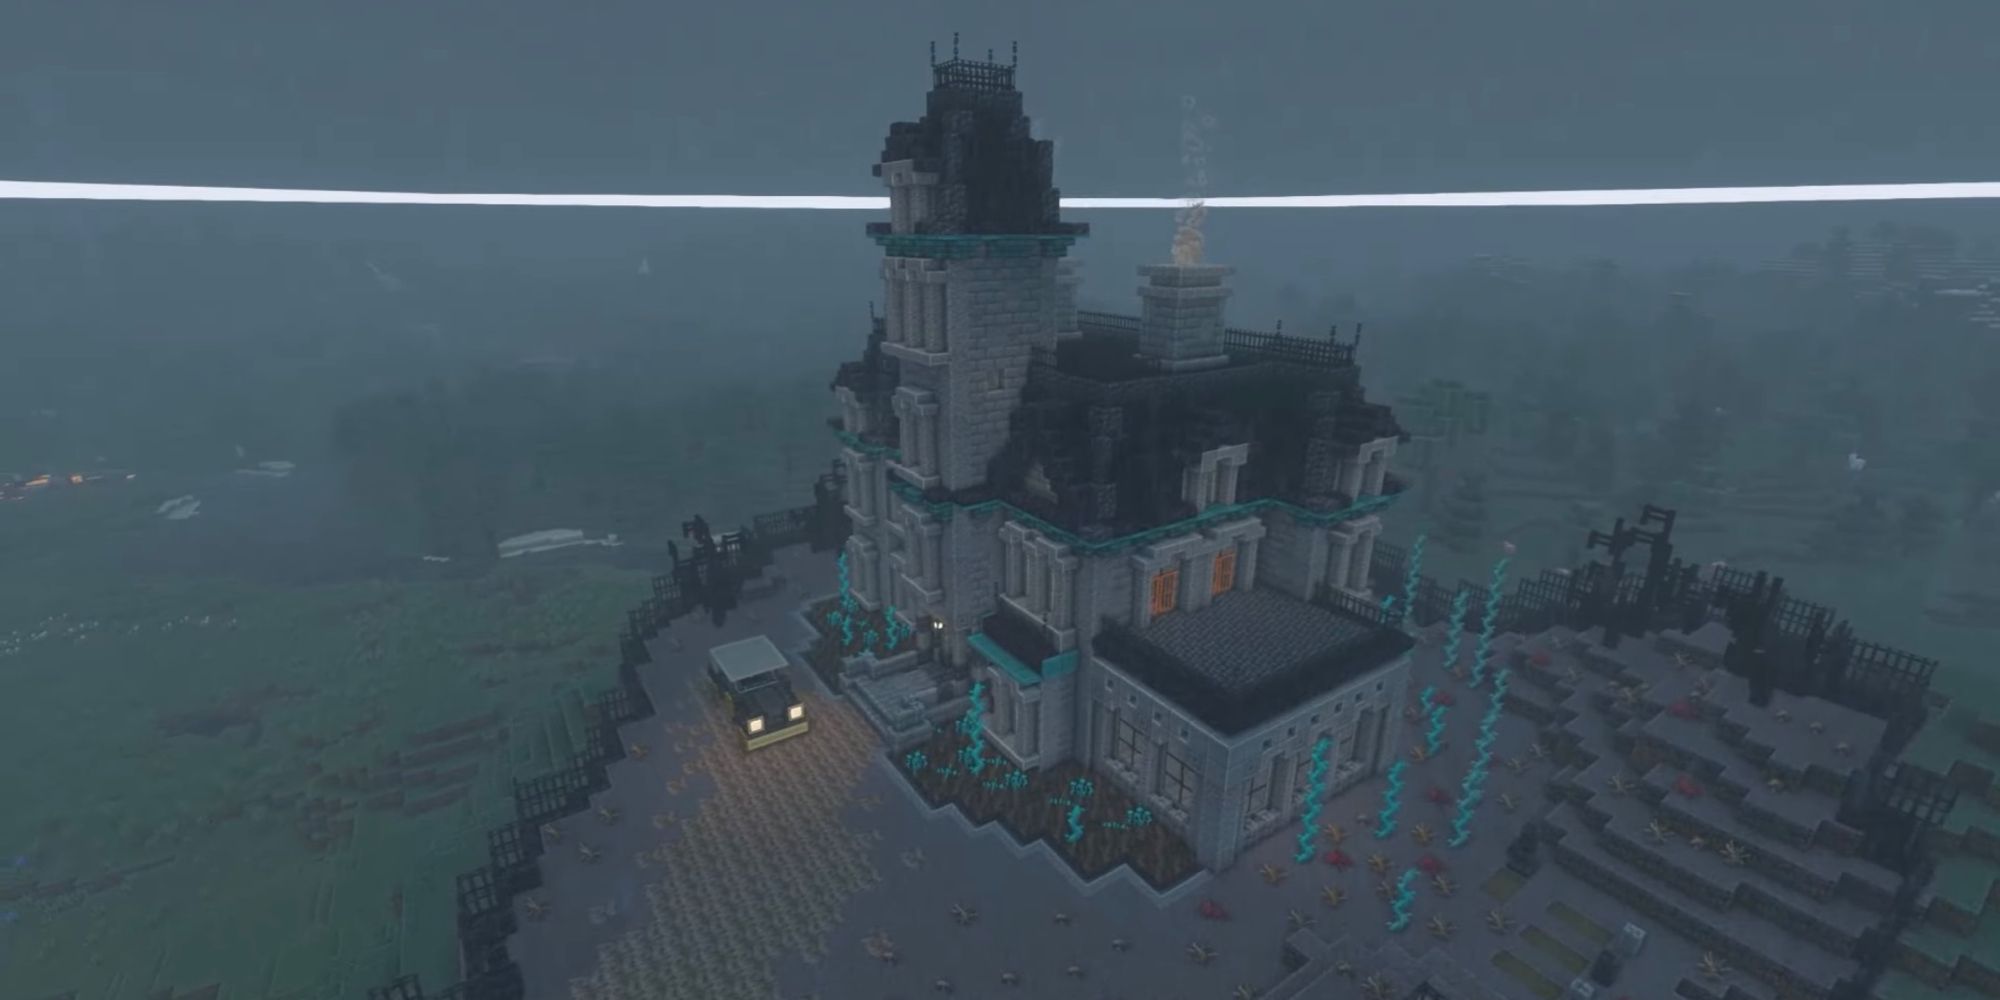 An image from Minecraft of the Addams Family House, from the popular horror movie.